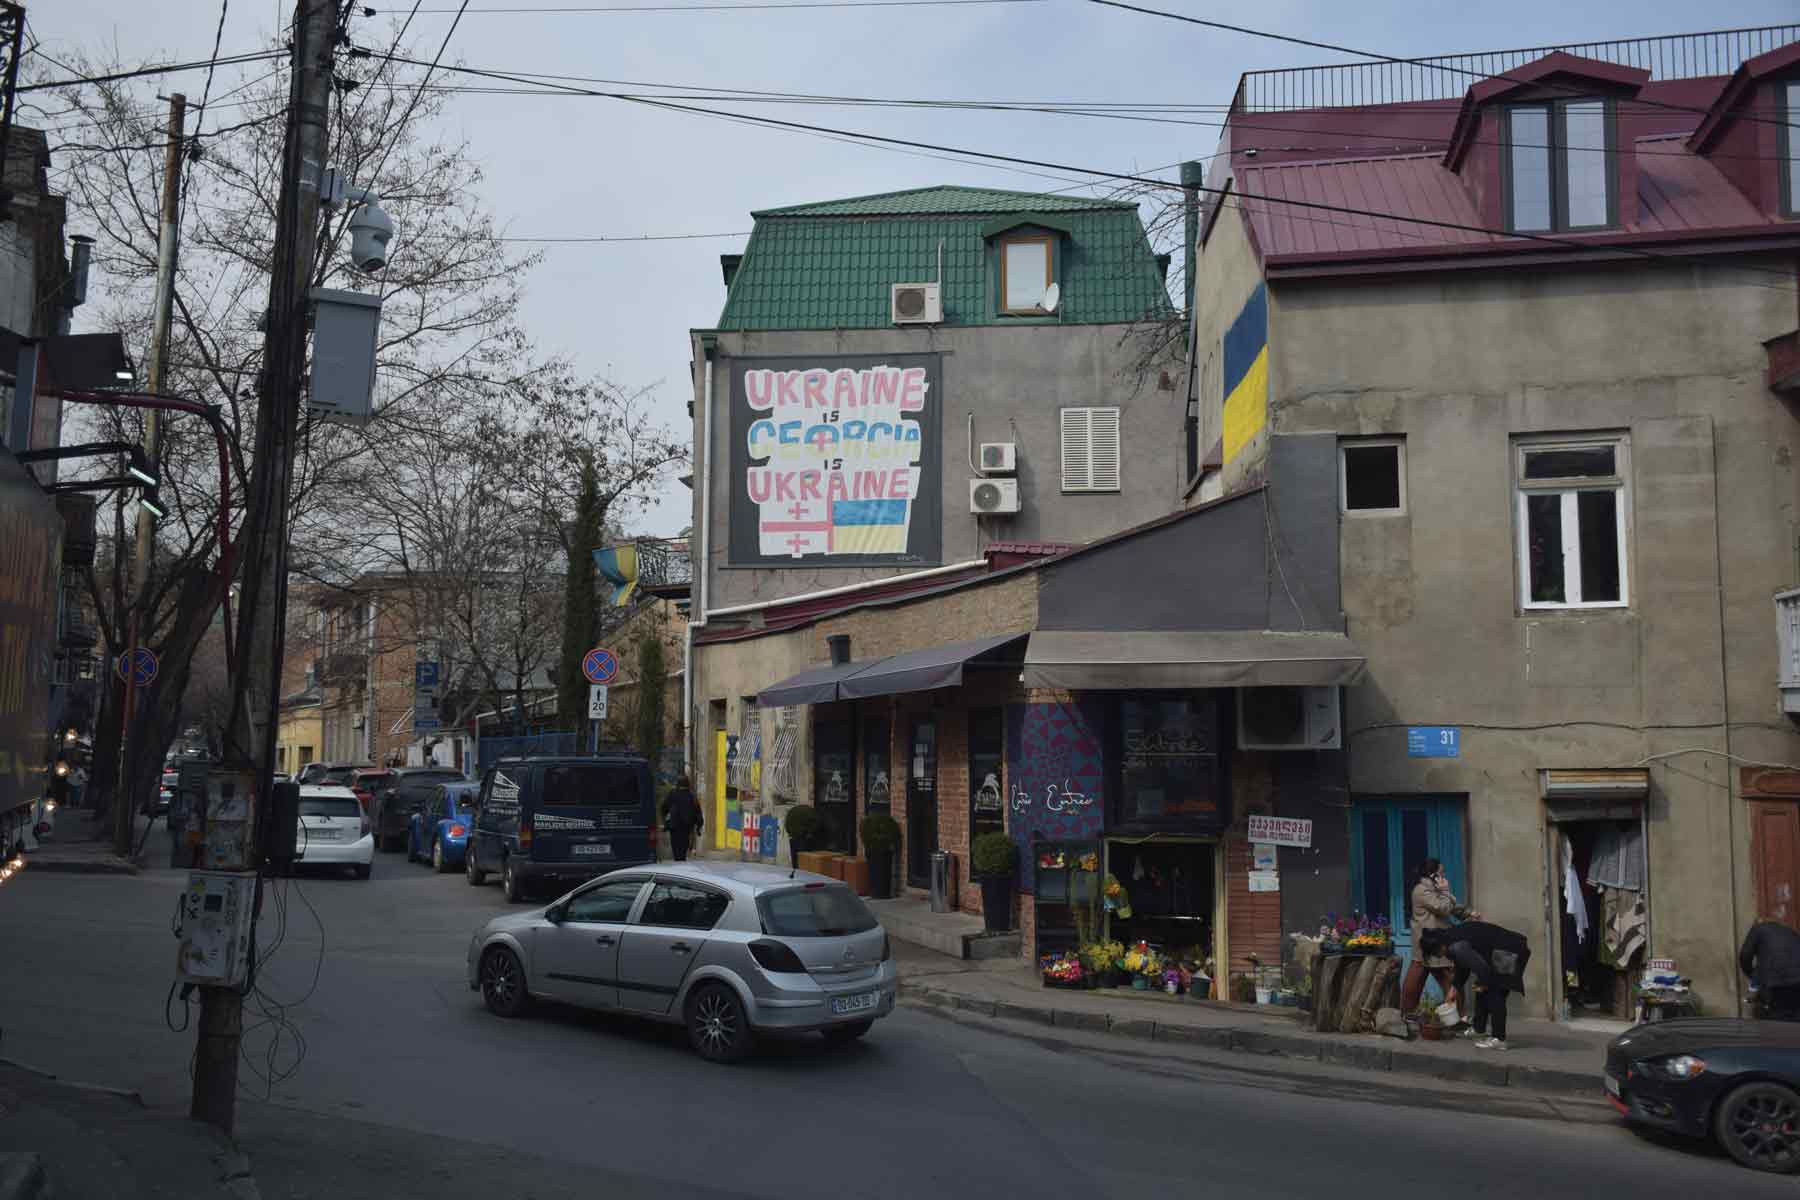 Slogans in support  of Ukraine are  visible across Tbilisi  but the Georgian  government has  yet to implement  any sanctions  against Russia